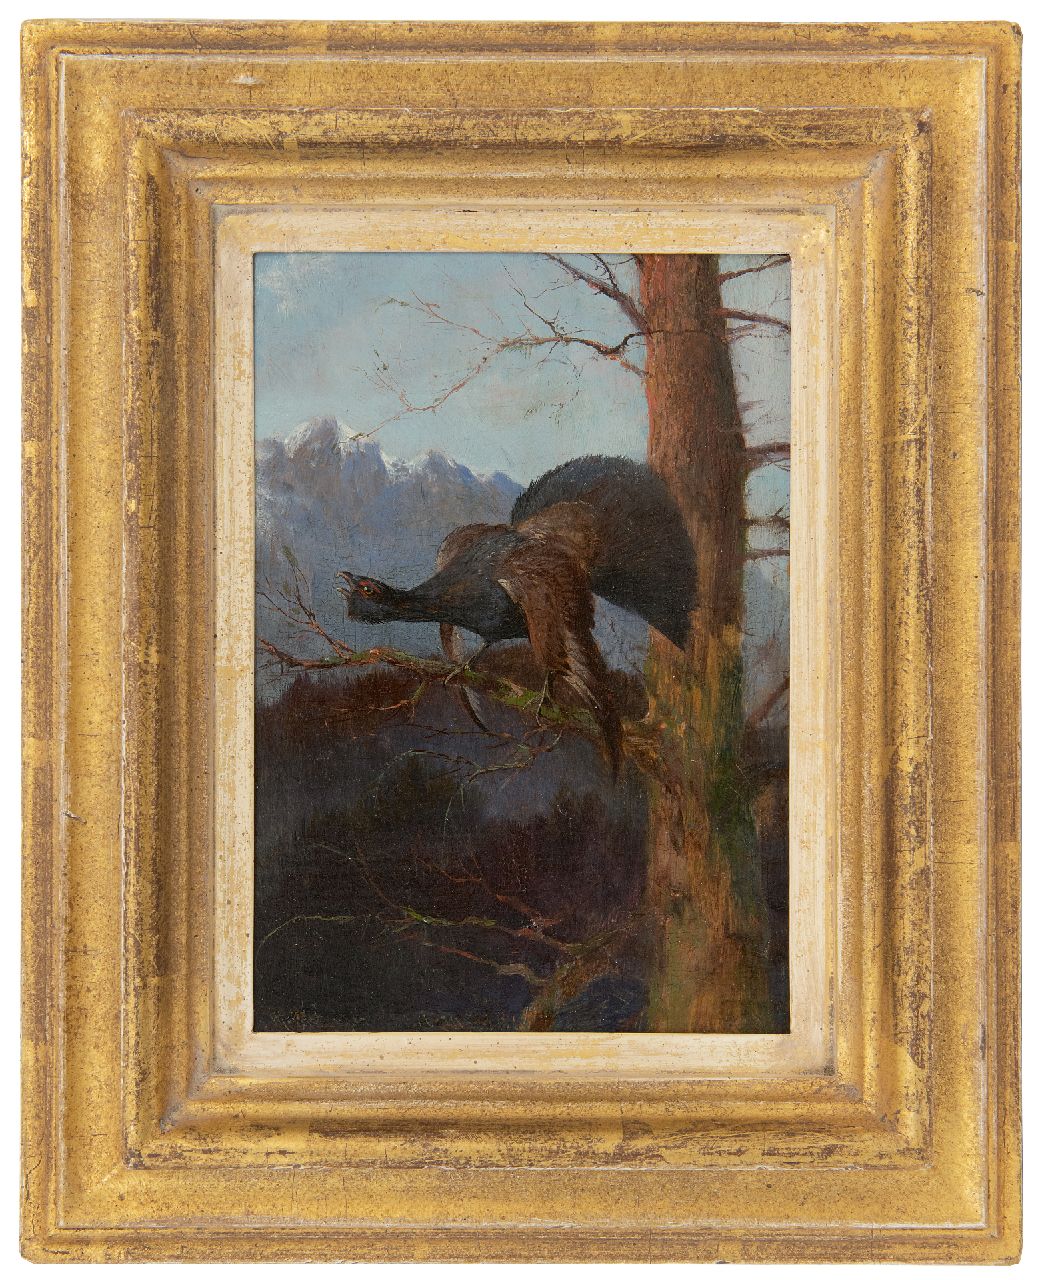 Hänger M.  | Max Hänger | Paintings offered for sale | Grouse looking left, oil on panel 19.2 x 13.2 cm, signed l.l.